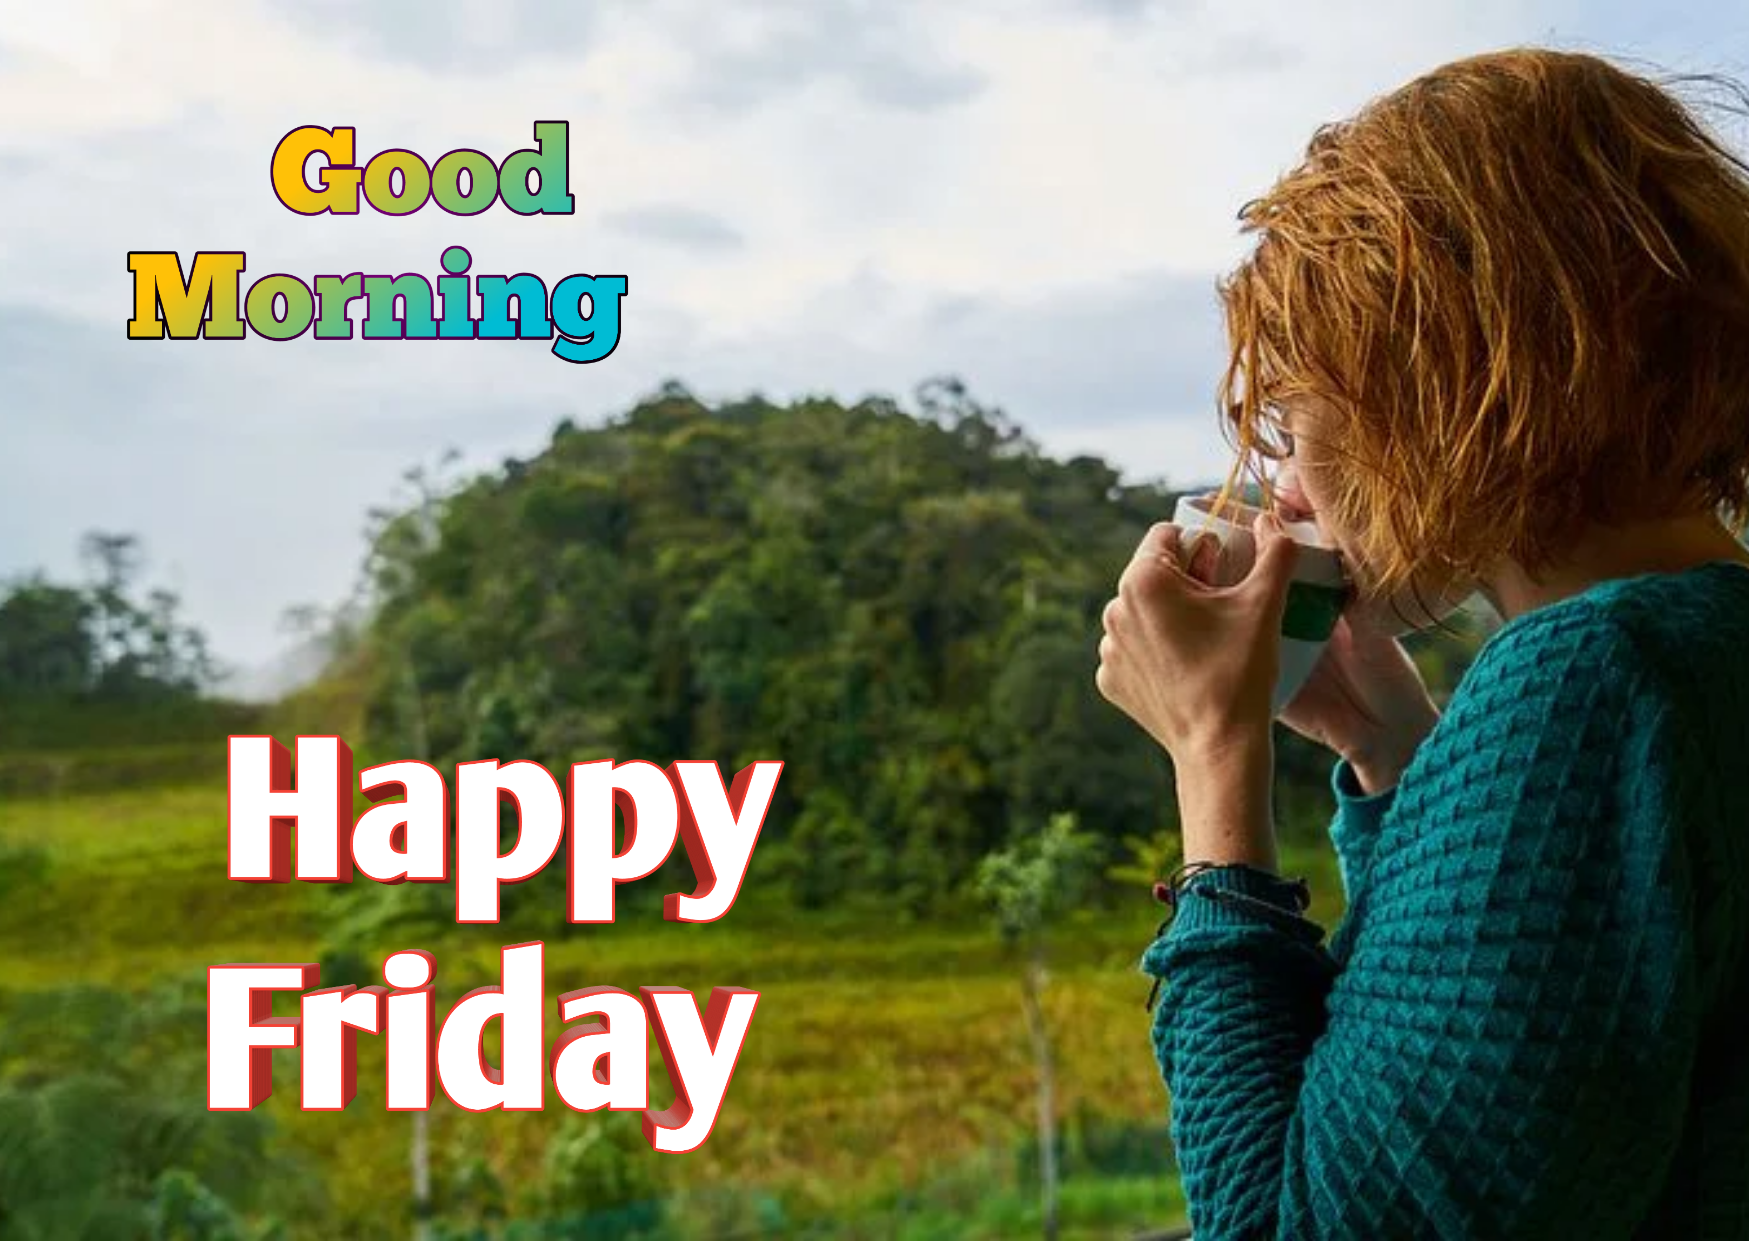 Happy Friday Wishes, Images, Wallpaper, Quotes, For Whatsapp, Free download,